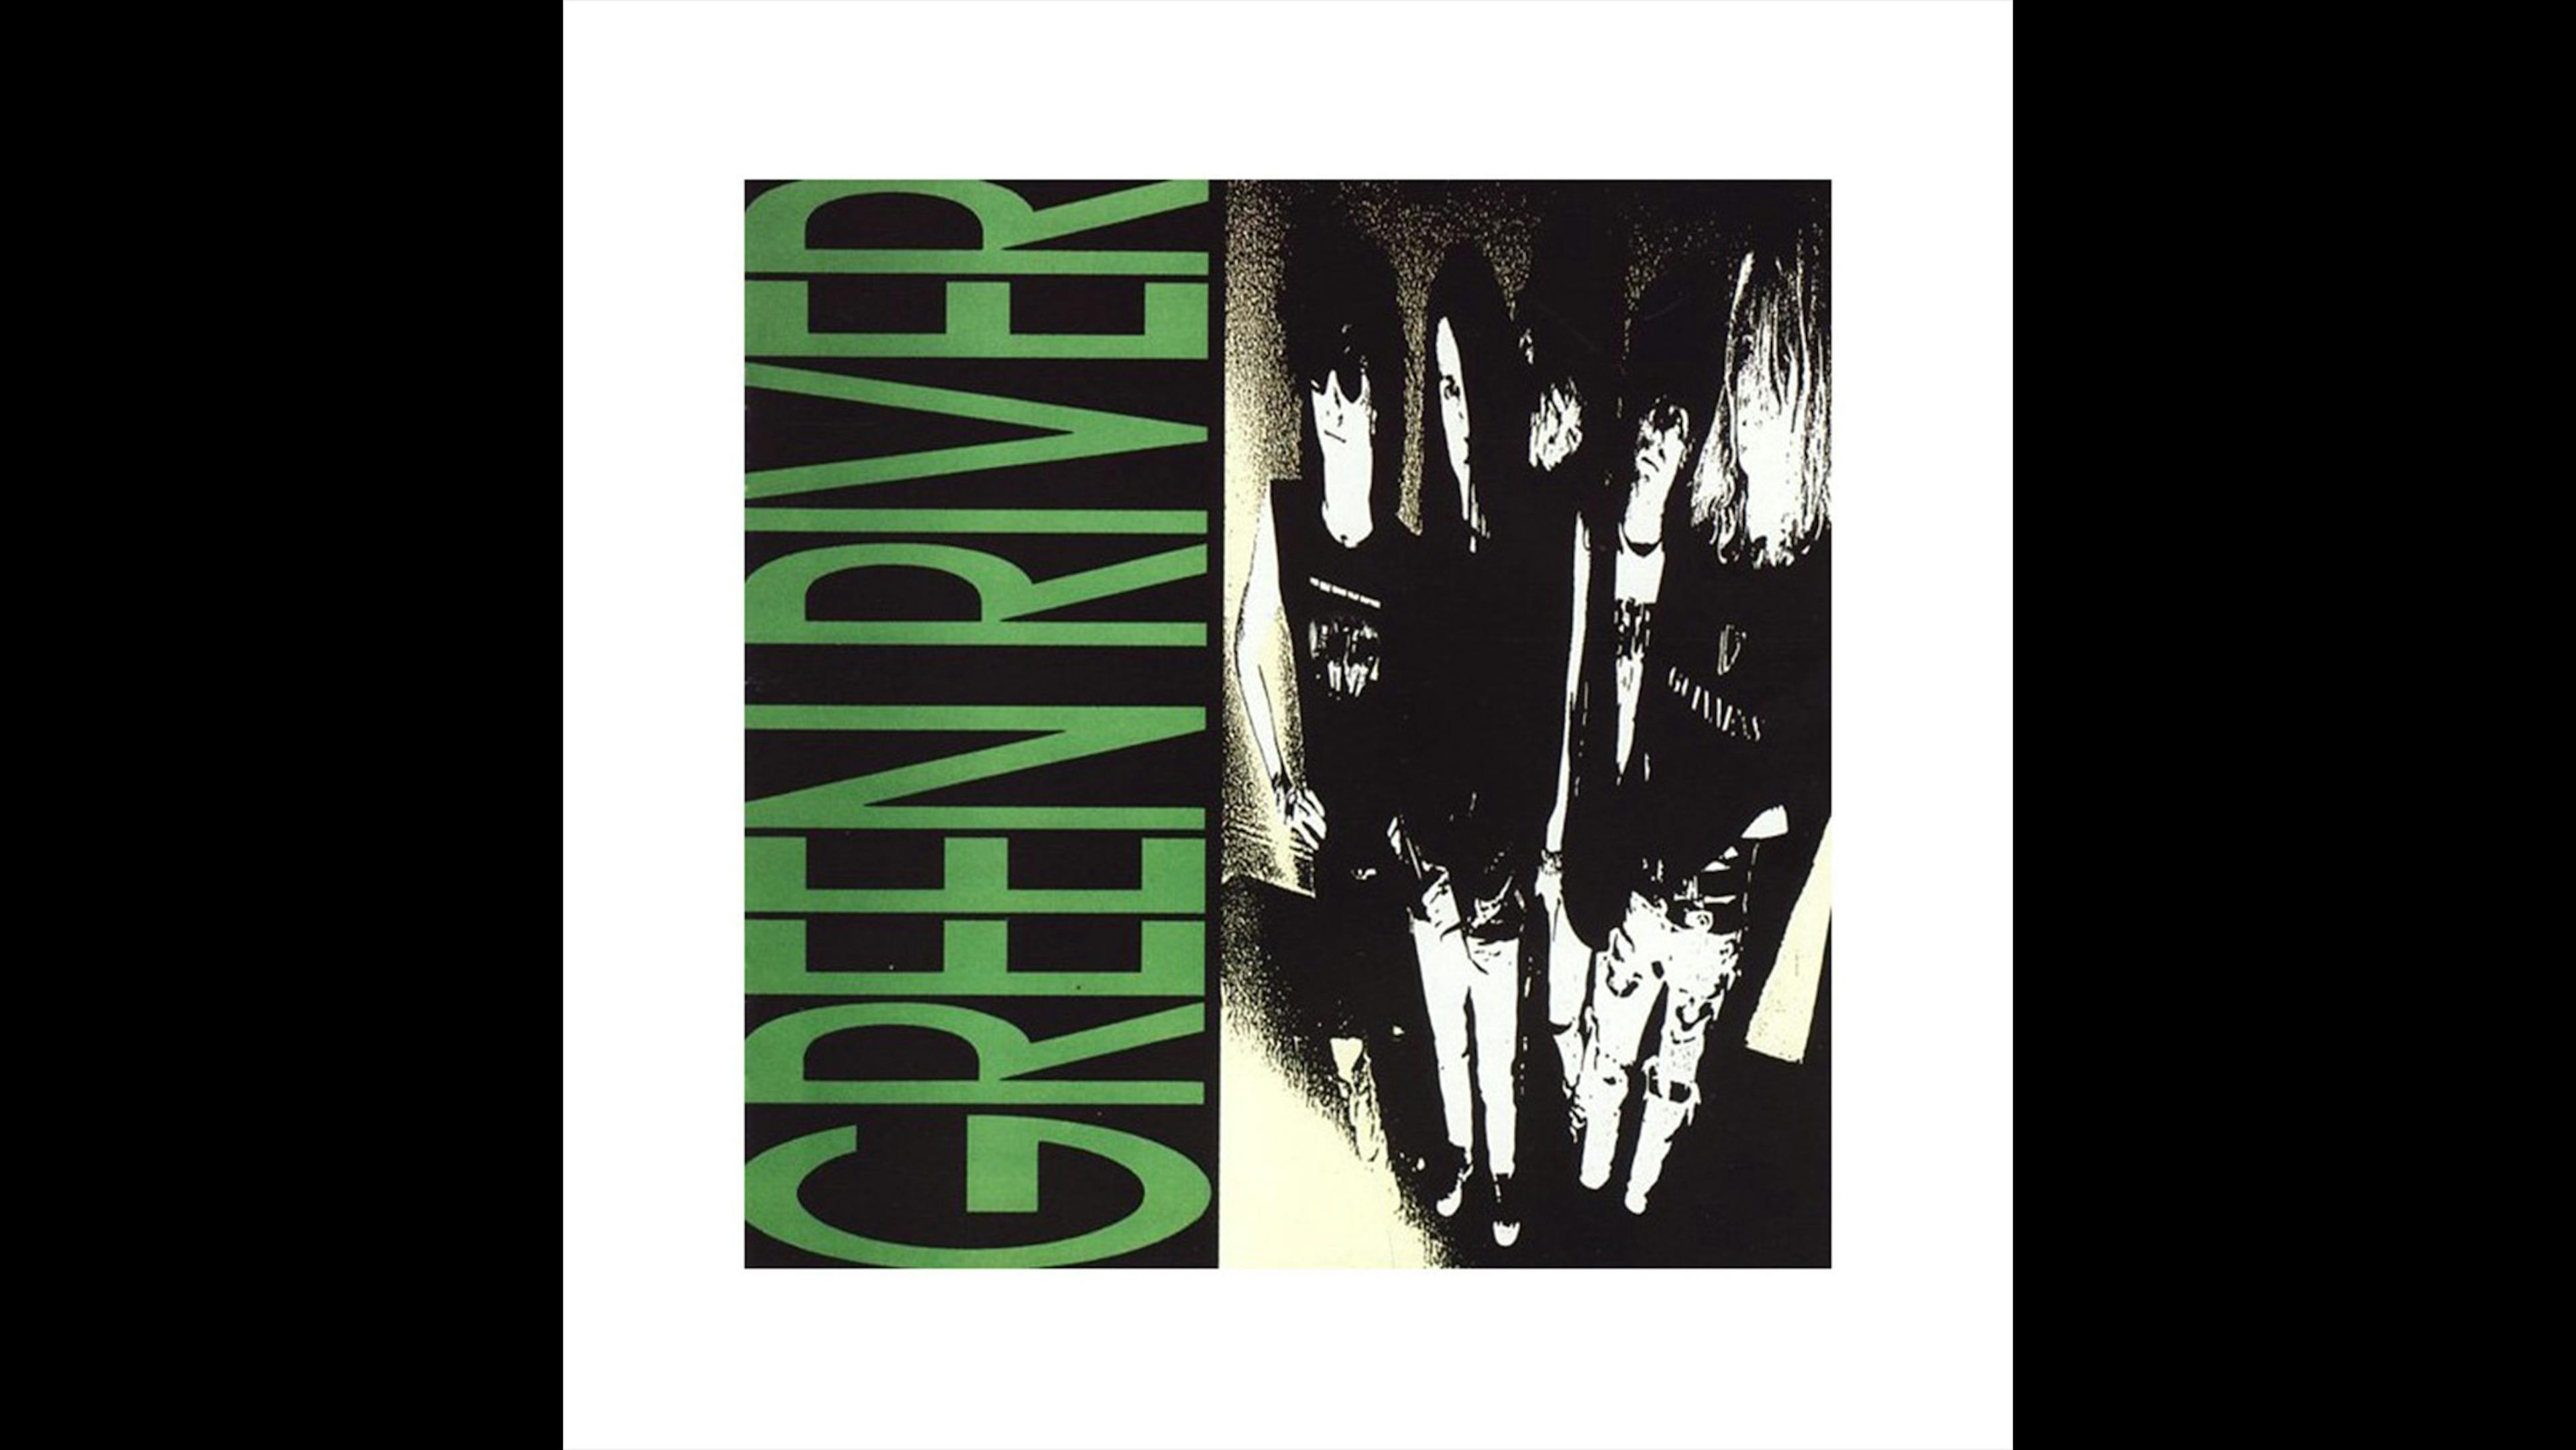 If one record truly signifies the birth of grunge it’s this ragged, five-track EP by Green River. The band’s post-Stooges snarl and ‘70s hard rock smarts are perfectly captured by producer Jack Endino. A few months after its release, internal tensions would tear the band apart midway through the recording of their debut album, Rehab Doll. Bassist Jeff Ament and guitarists Stone Gossard and Bruce Fairweather would give vent to their neo-glam ambitious in Mother Love Bone, while frontman Mark Arm continued to adhere to his punk principles by forming Mudhoney.